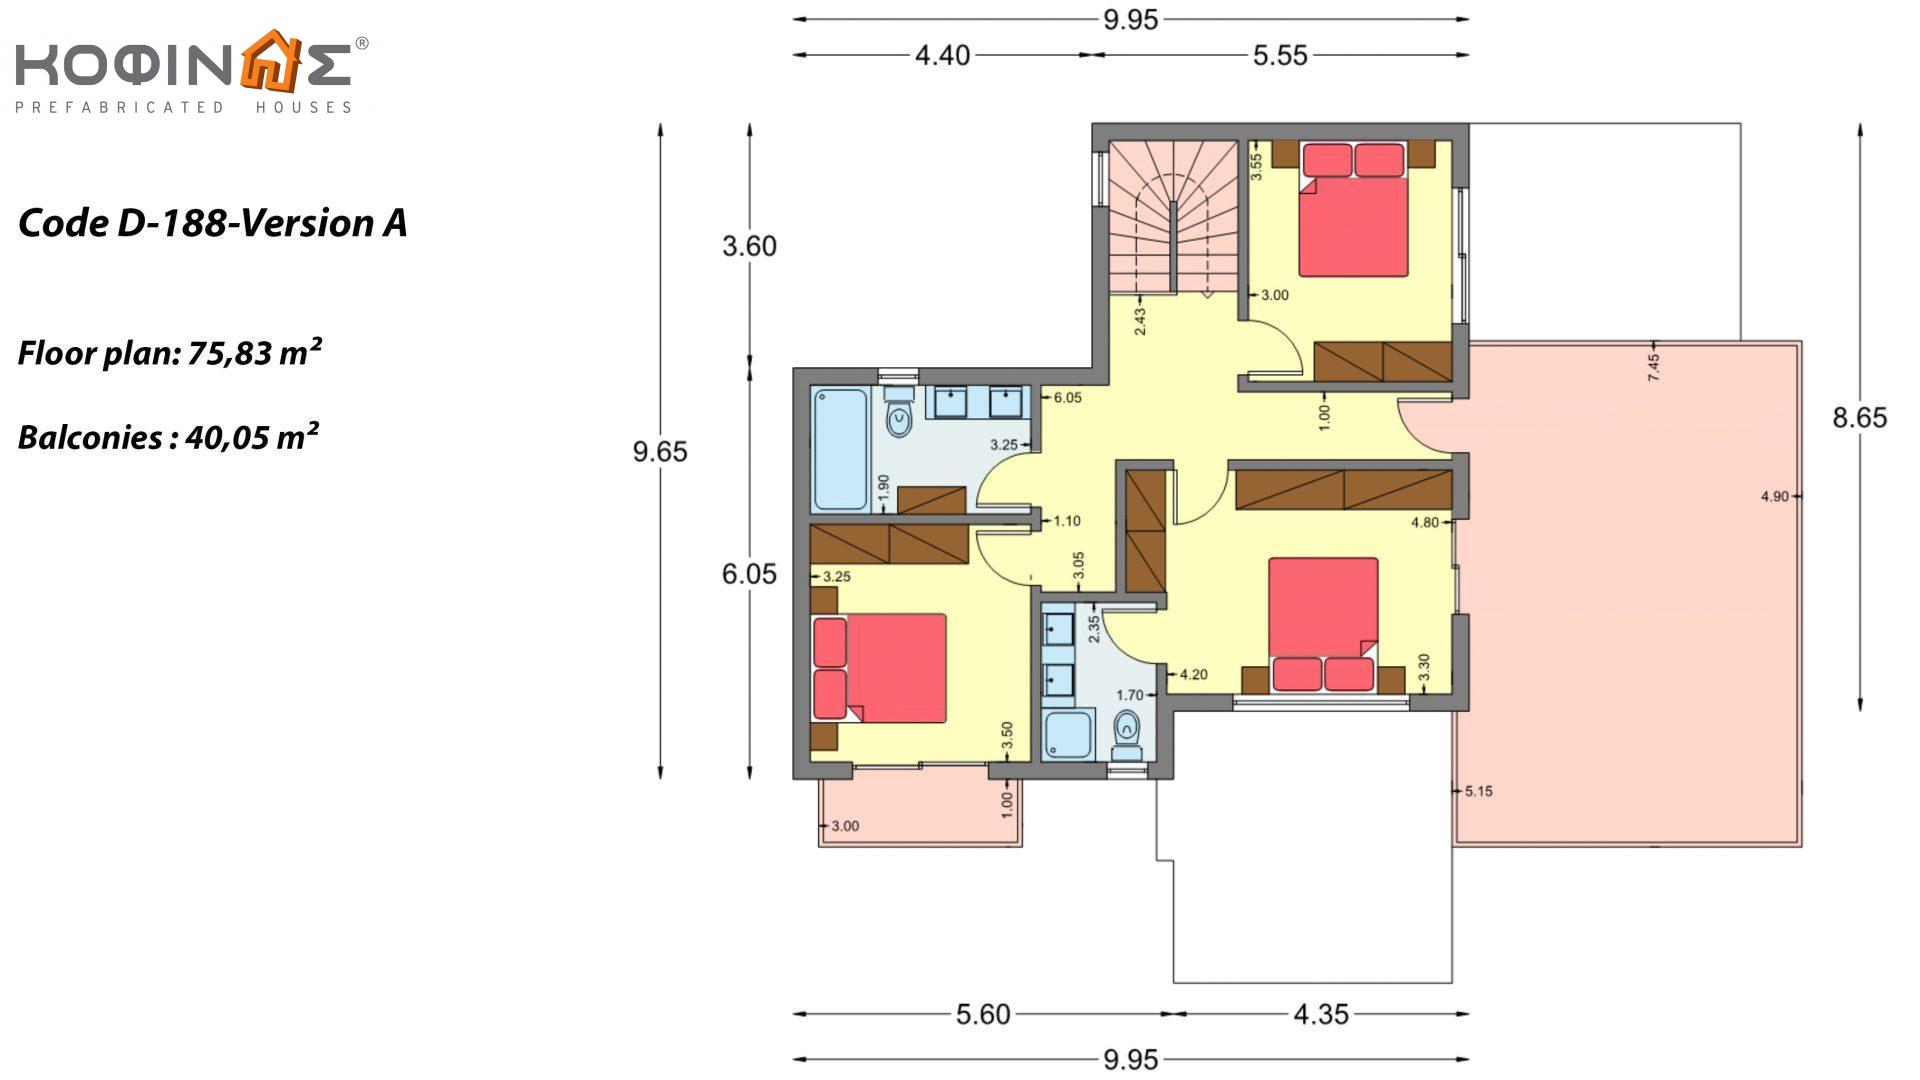 2-story house D-188, total surface of 188,66 m² ,covered roofed areas 38.20 m²,balconies 40.05 m²